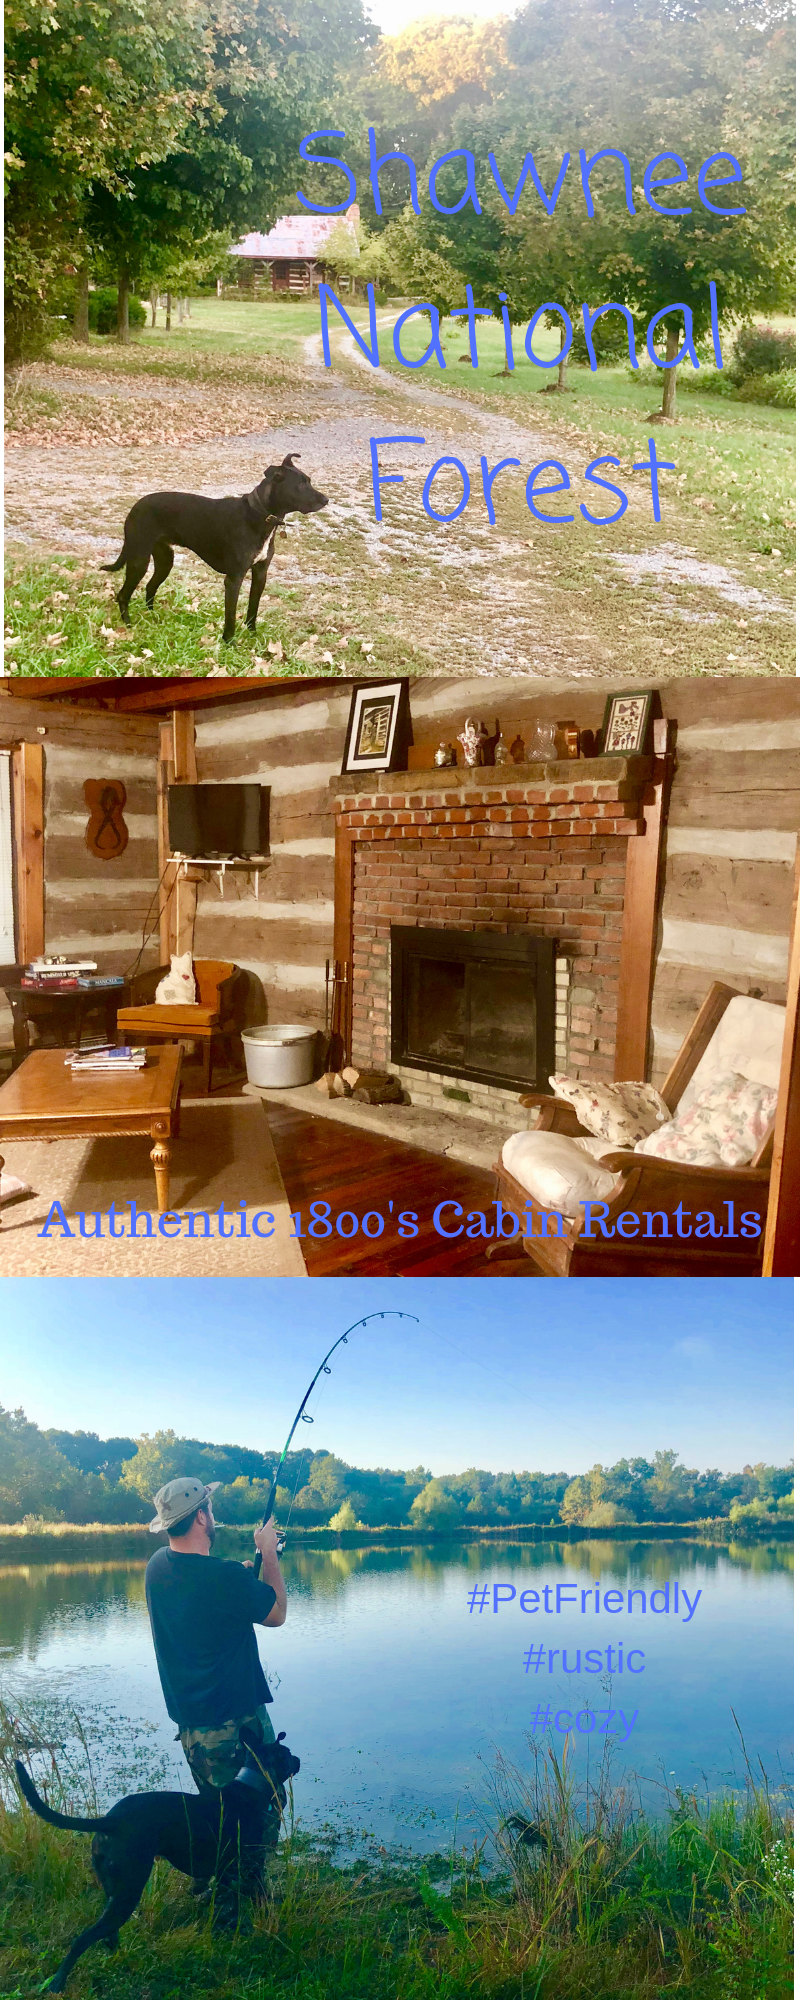 Authentic 1800's cabins for rent by Shawnee National Forest at the Olde Squat Inn , #petfriendly #cozy #rustic #quaint #historic #bedandbreakfast #fishingpond #cabinrentals #shawneenationalforest 